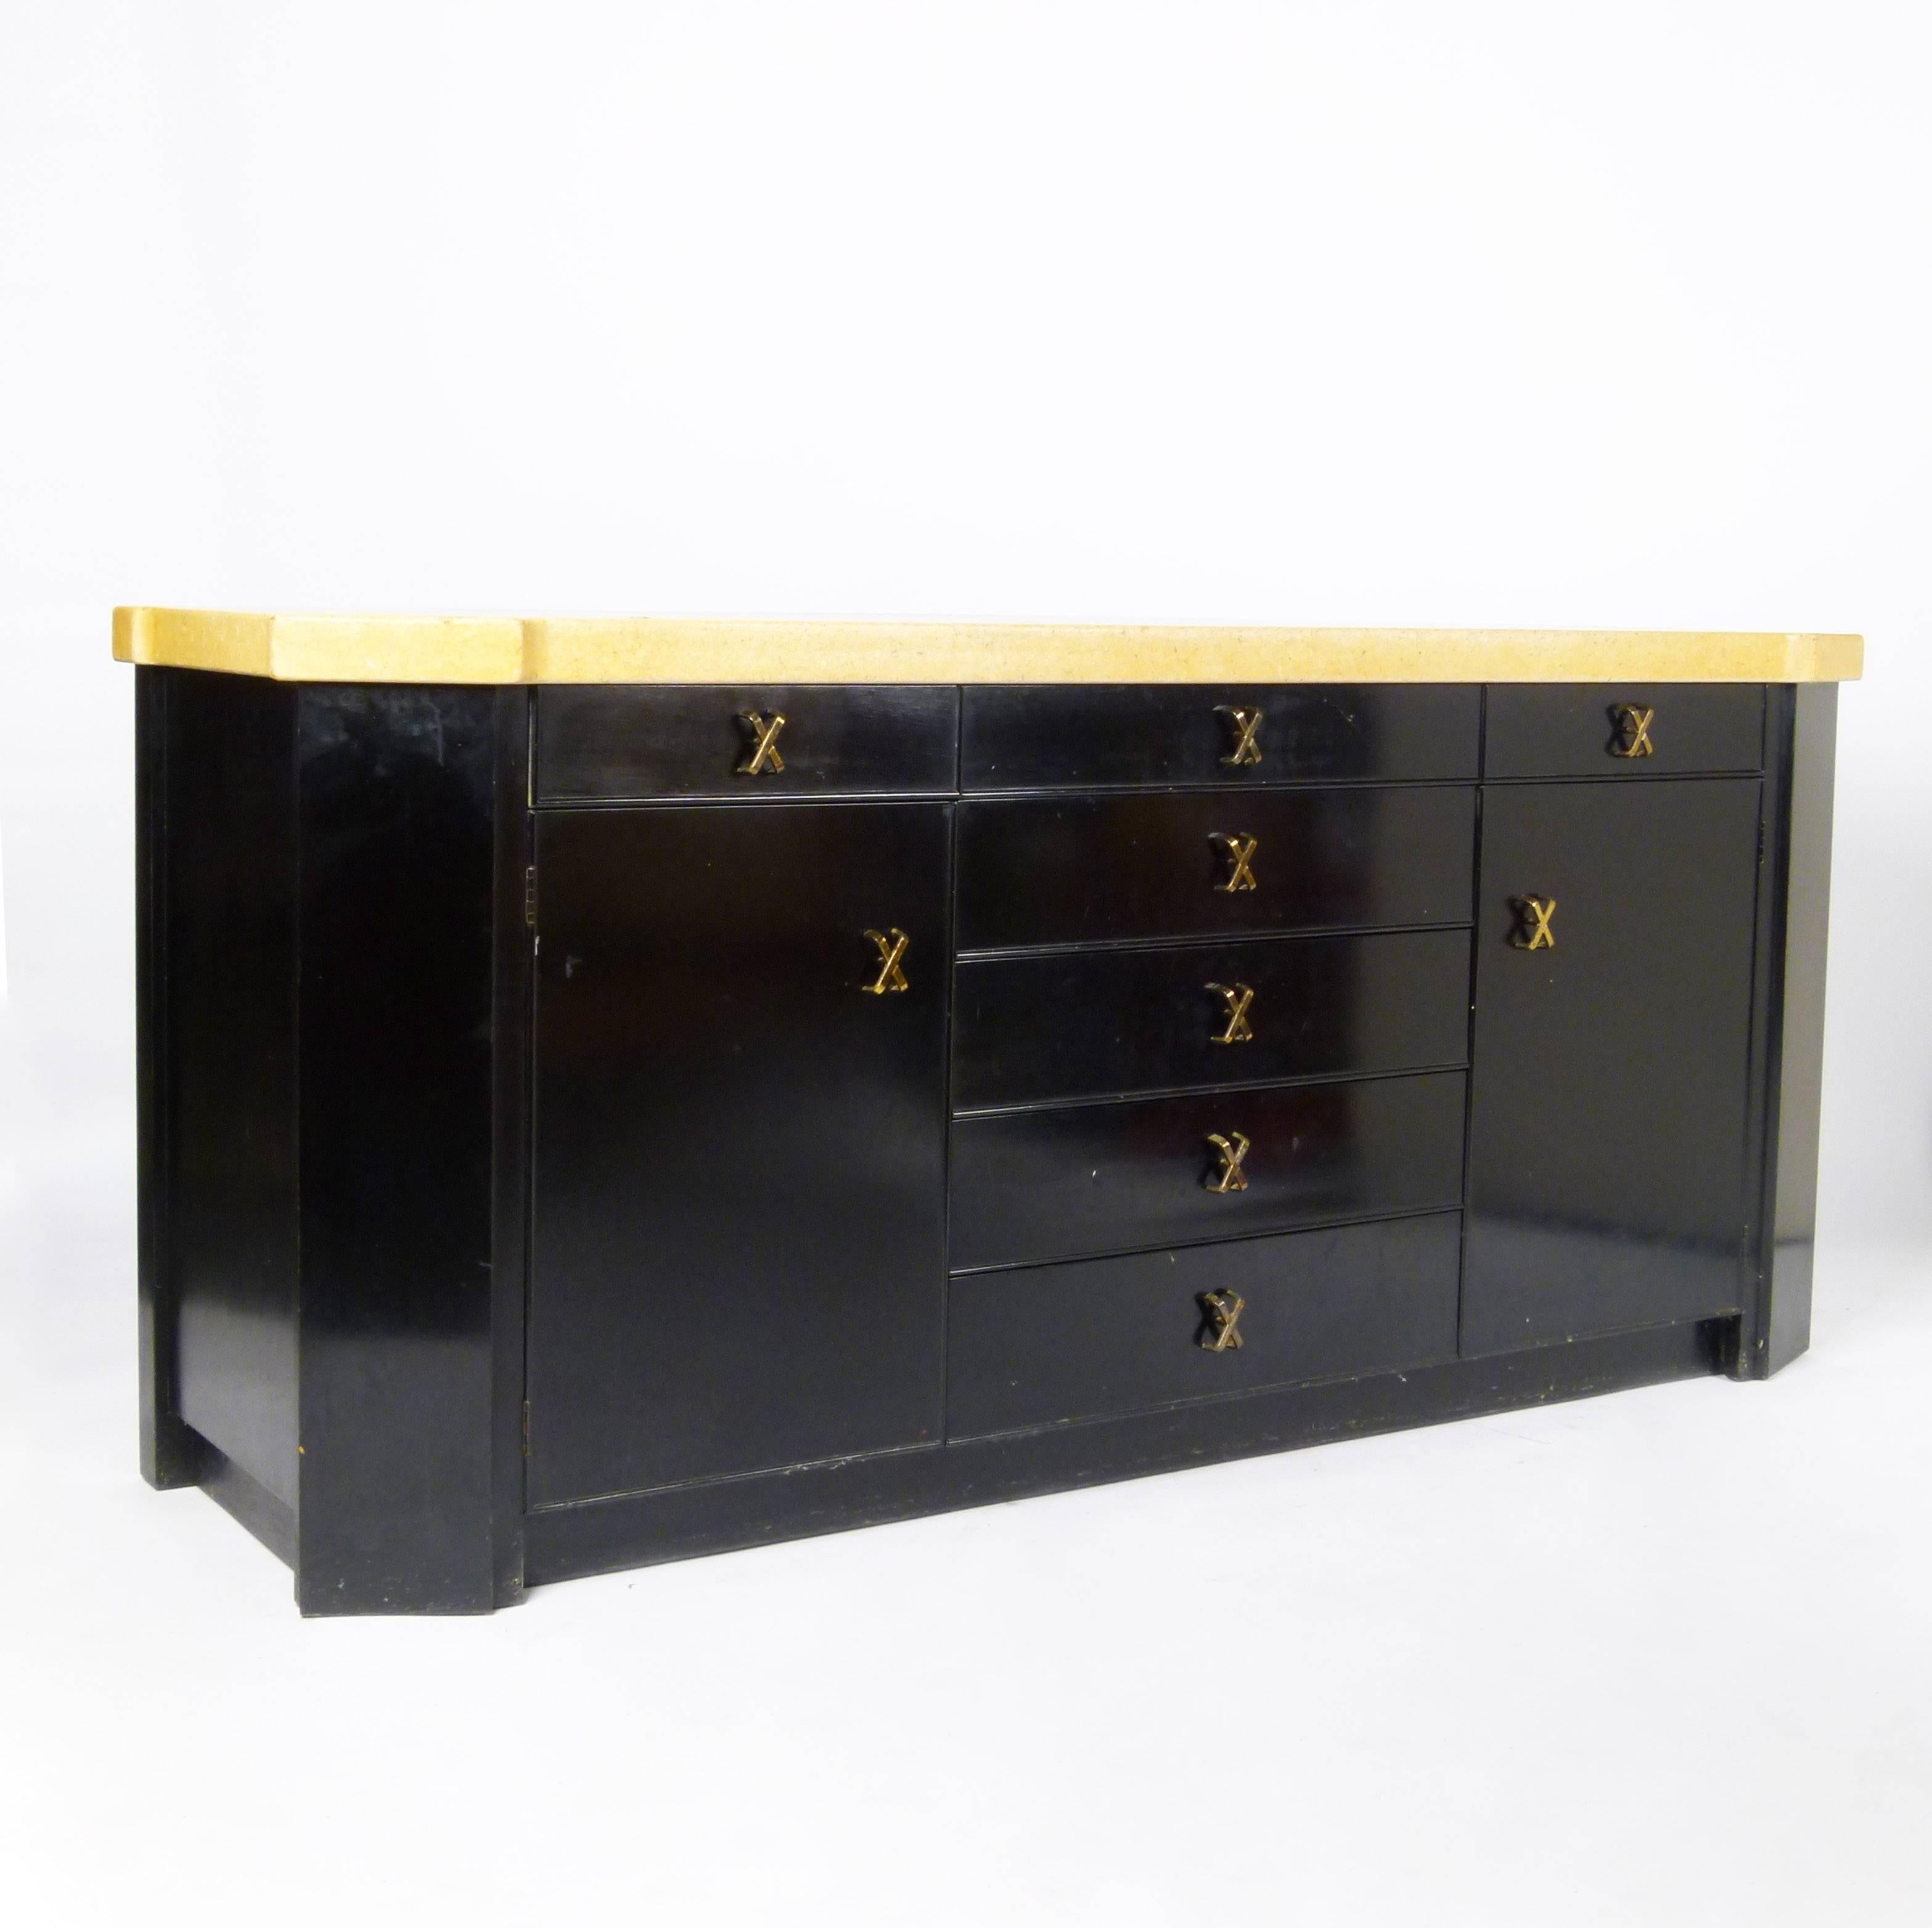 Classic Paul Frankl 1940s dining suite with cork tops over black lacquered bases and his Classic X brass pulls Johnson Furniture Company. A rare grouping including dining table with two leaves, sideboard with removable hutch (hutch includes sliding